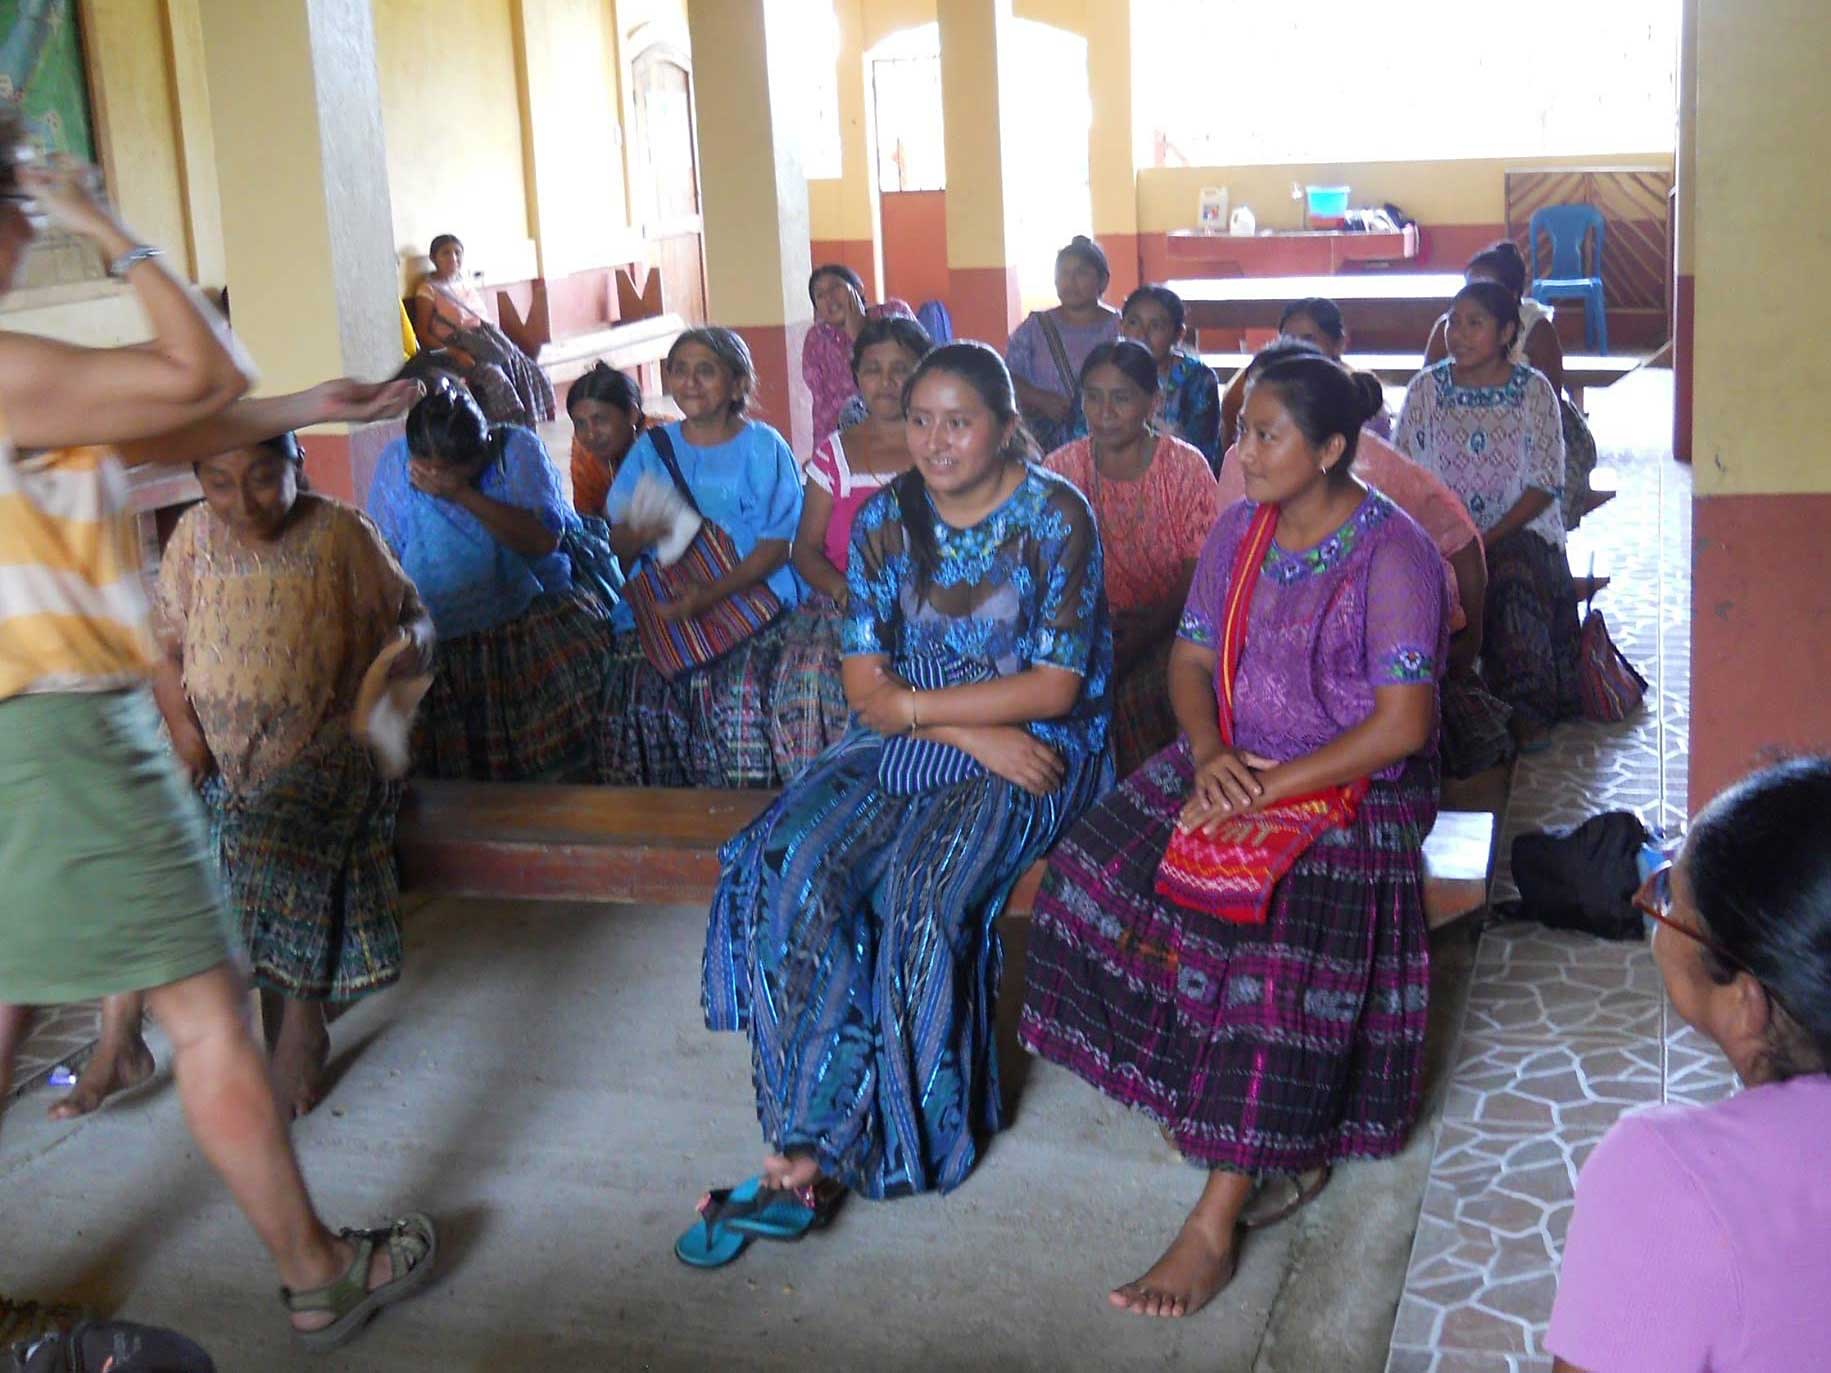 Midwives smiling during a teaching session